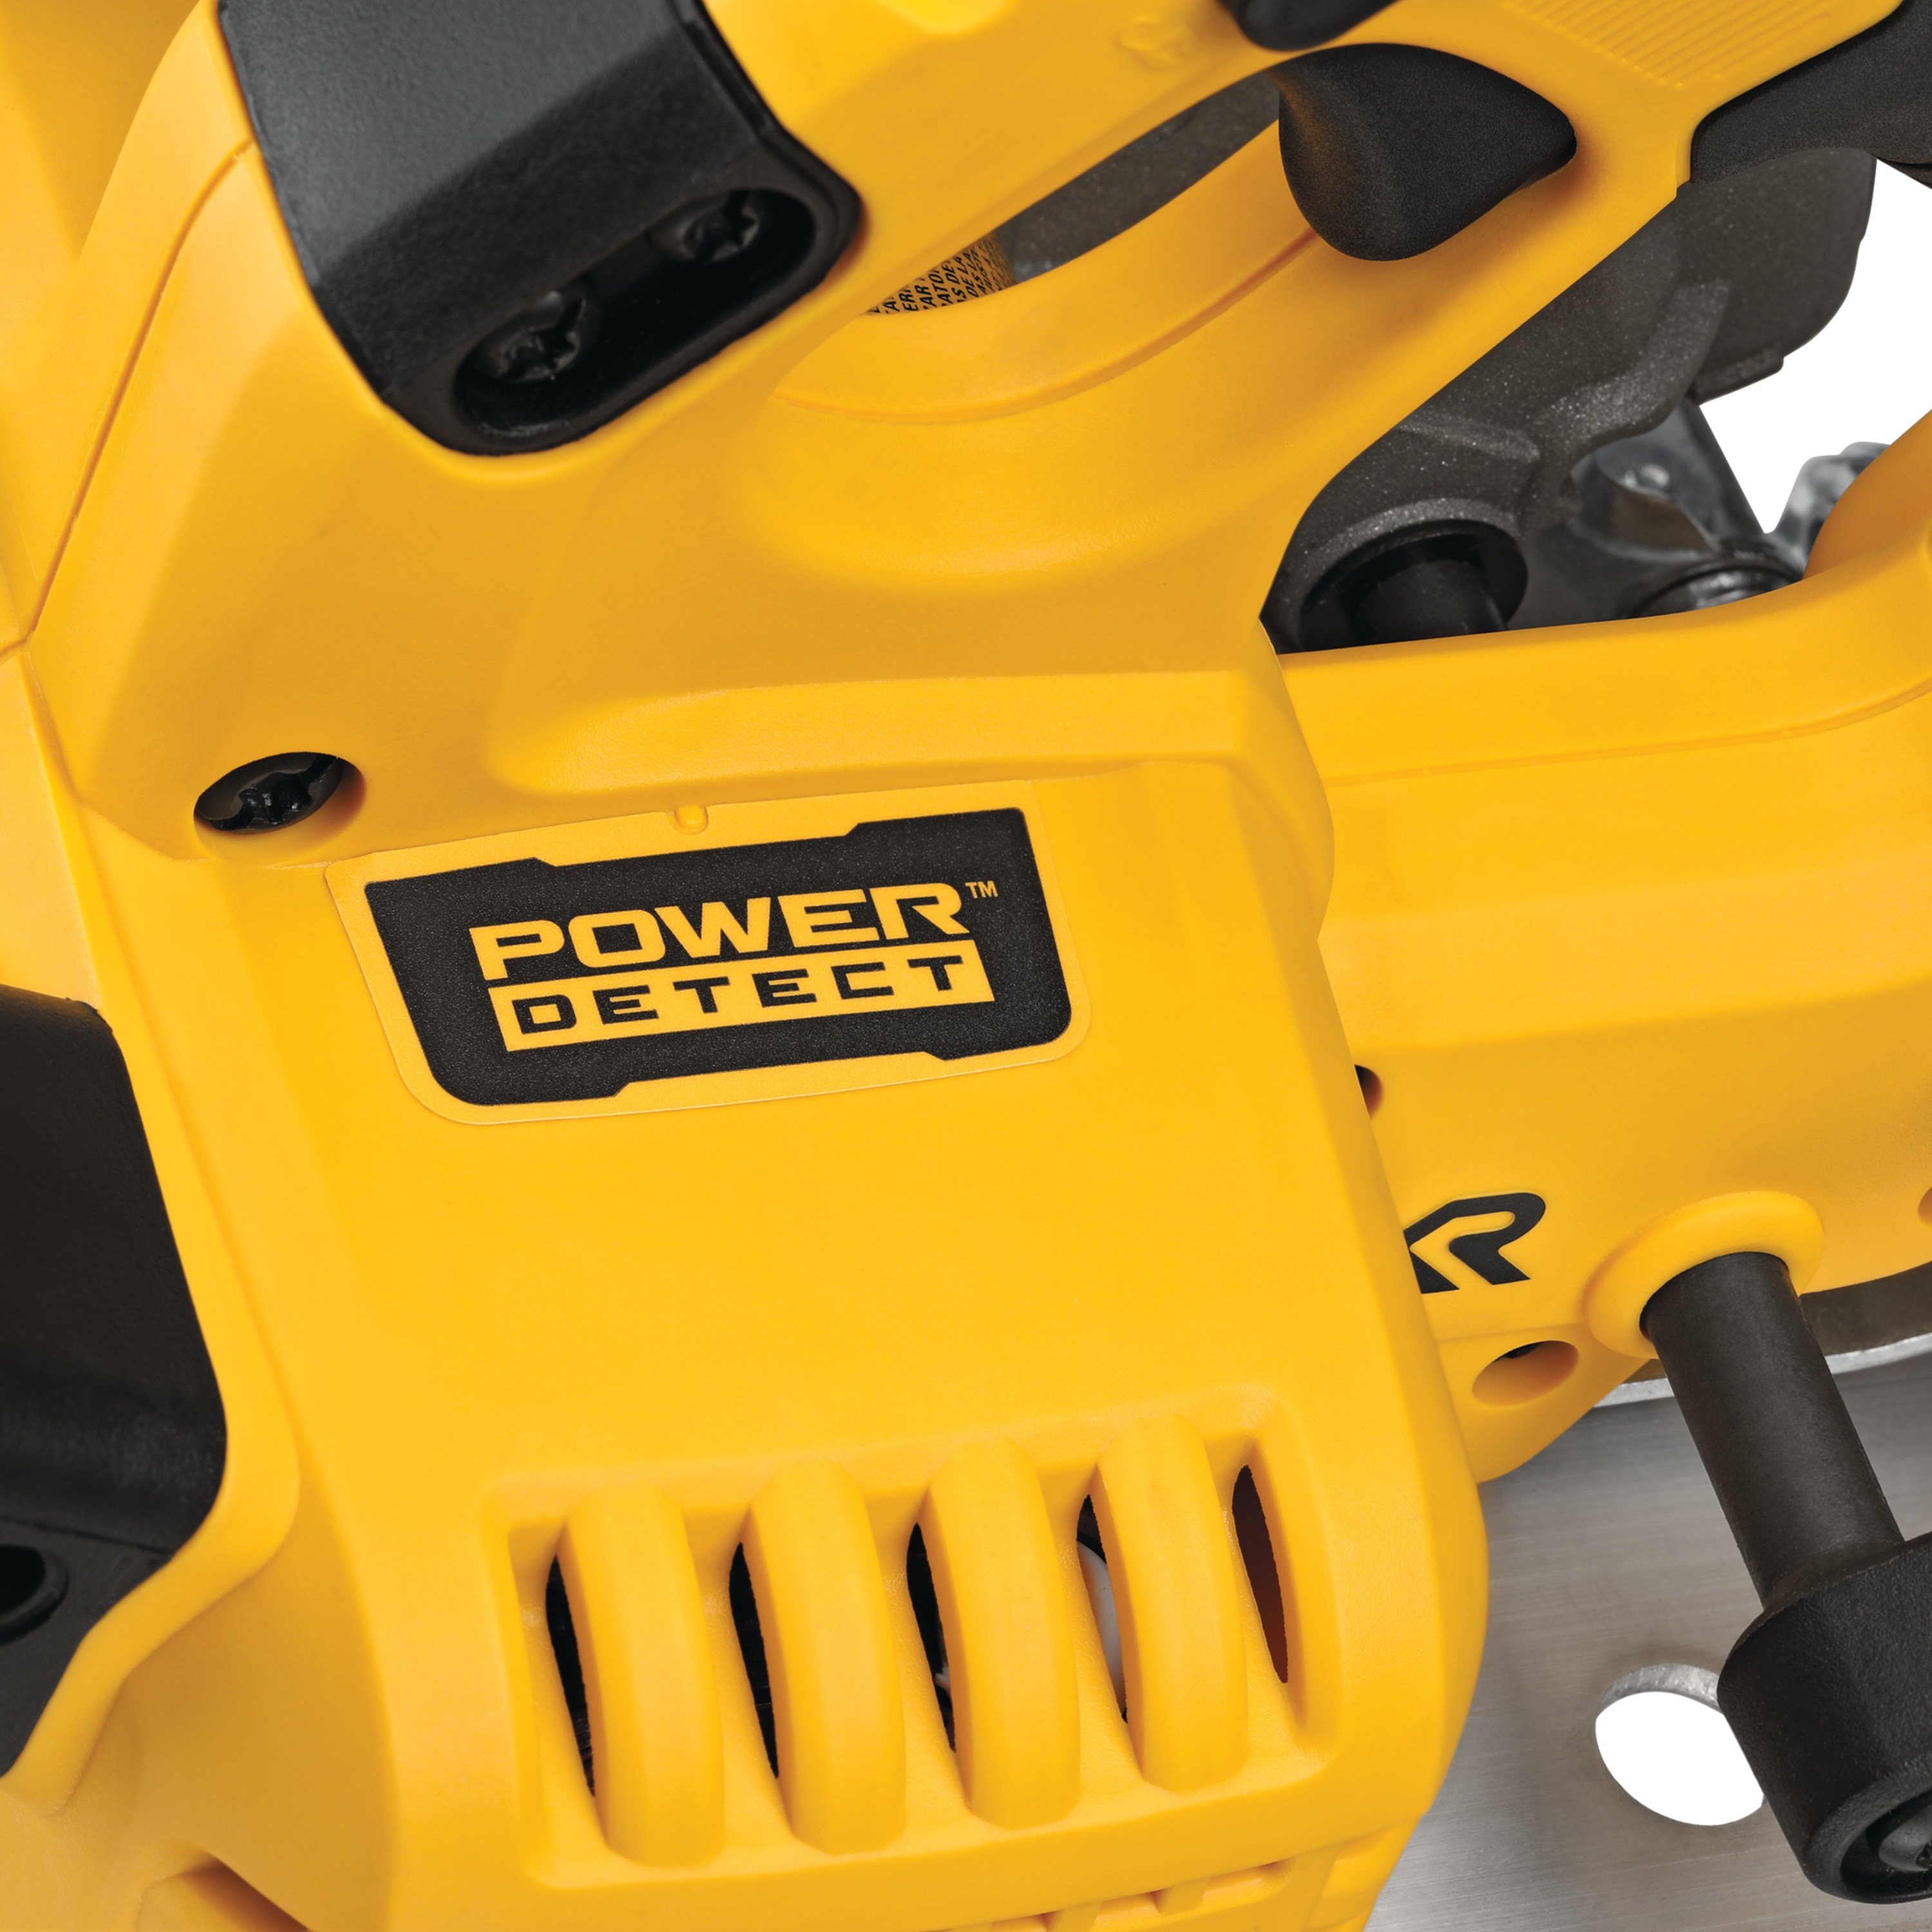 POWER DETECT feature of XR brushless circular saw.